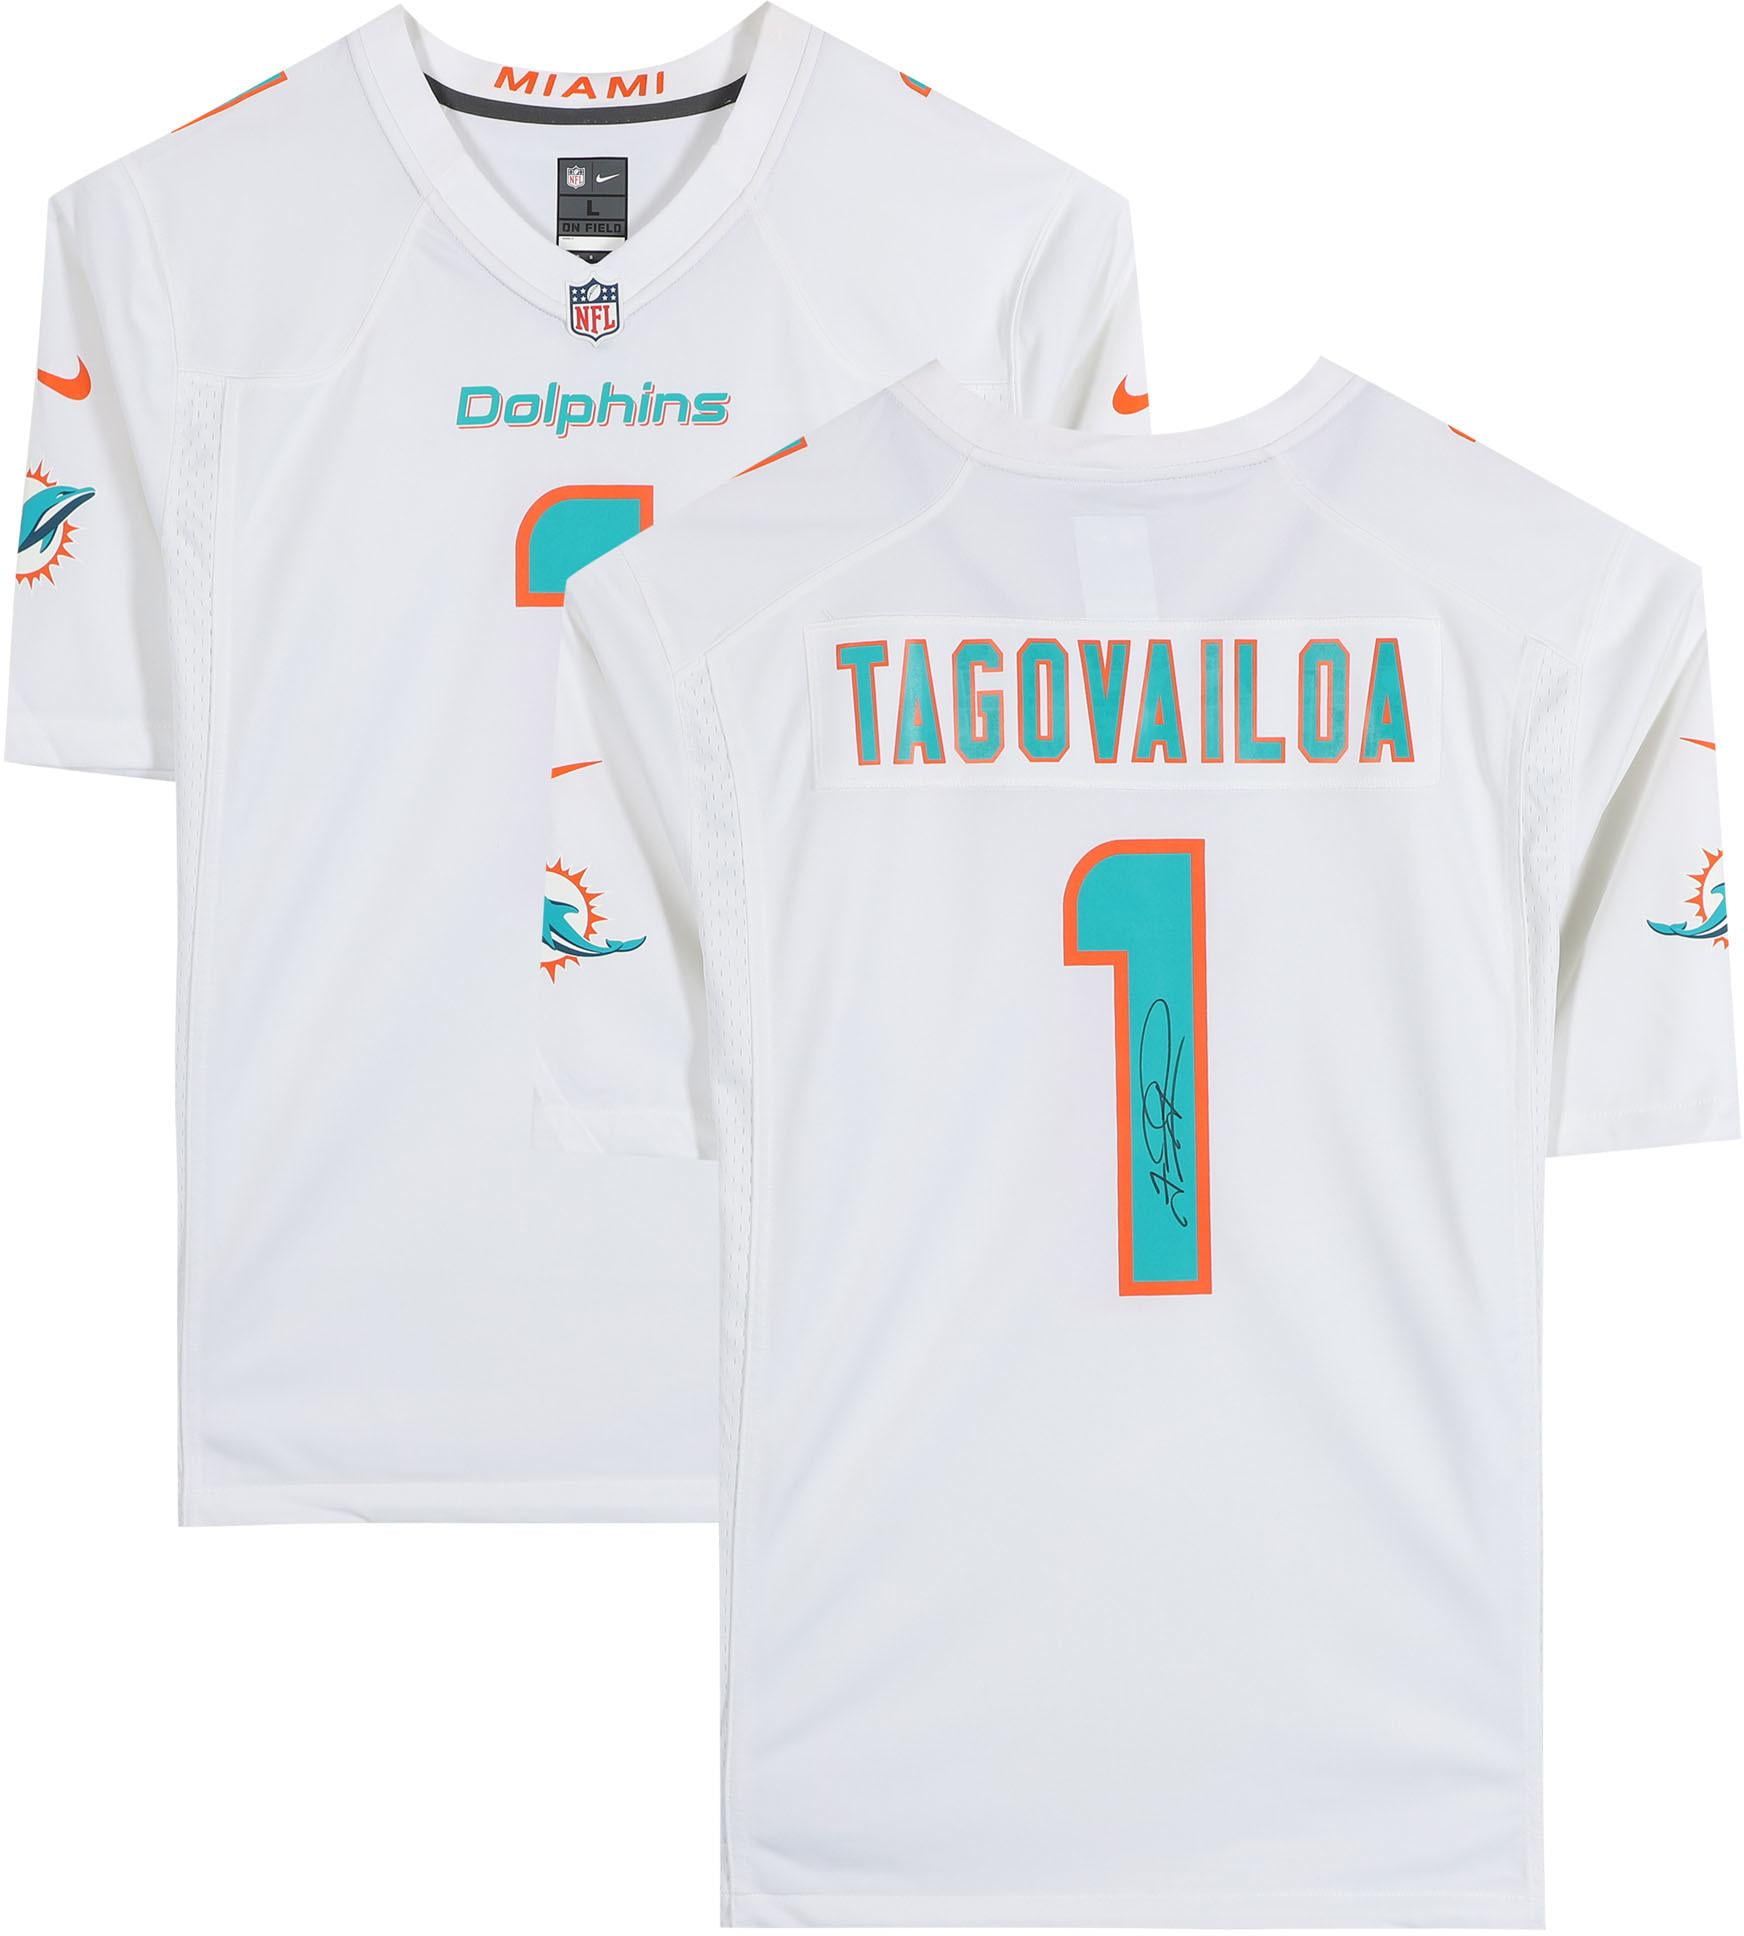 dolphins jersey black